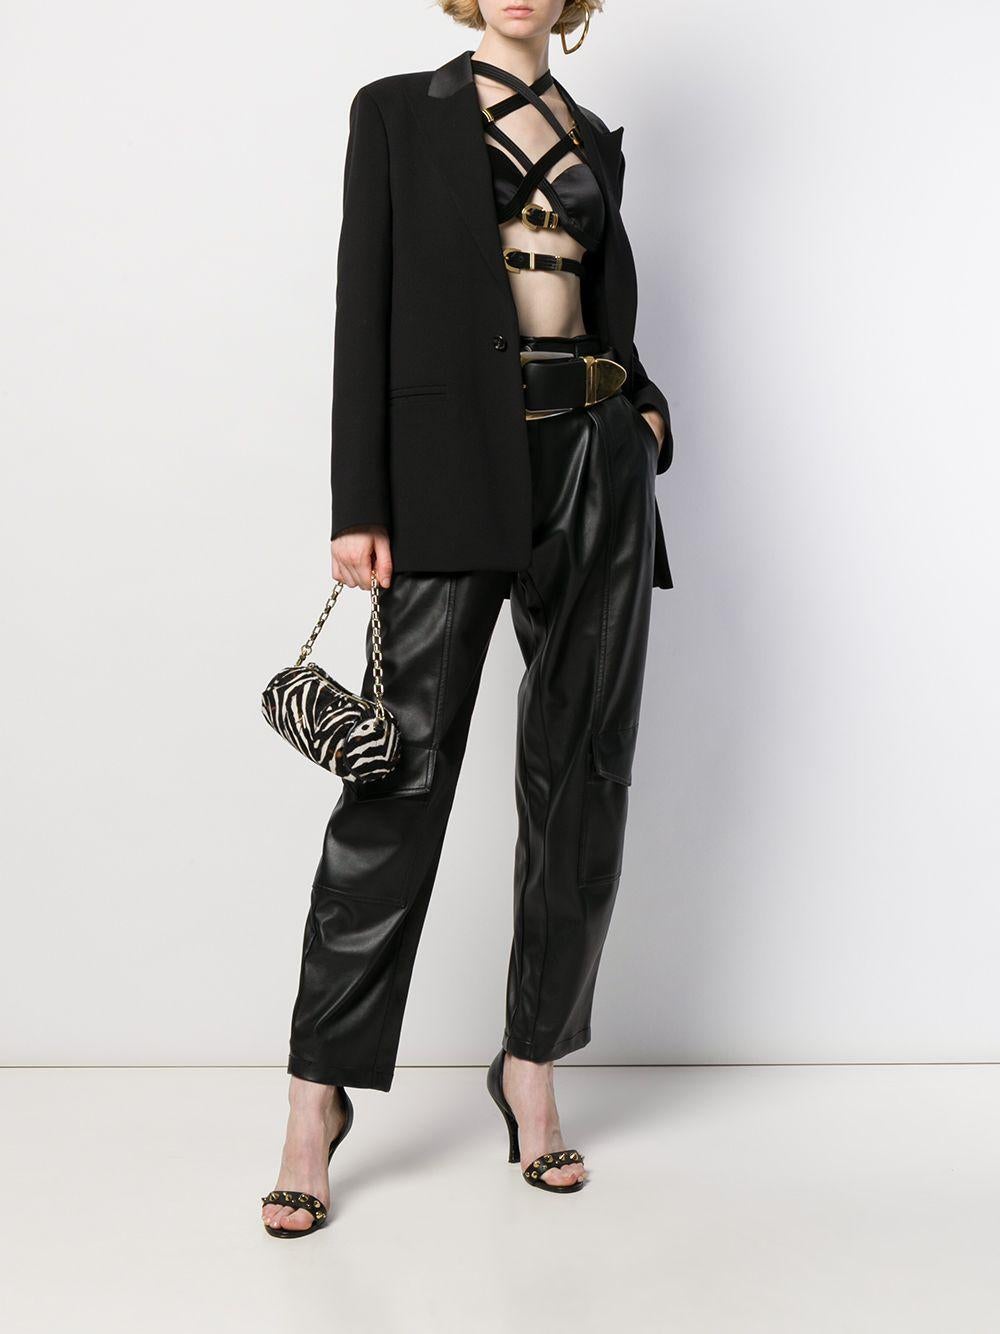 Versace Fall 2019 Runway Black Cropped Bondage Top

Inspired by Versace's rich heritage, this cropped bondage top from Versace take us straight to a 90's vibe, when Donatella Versace showcased bold bondage-inspired corset tops. Crafted from